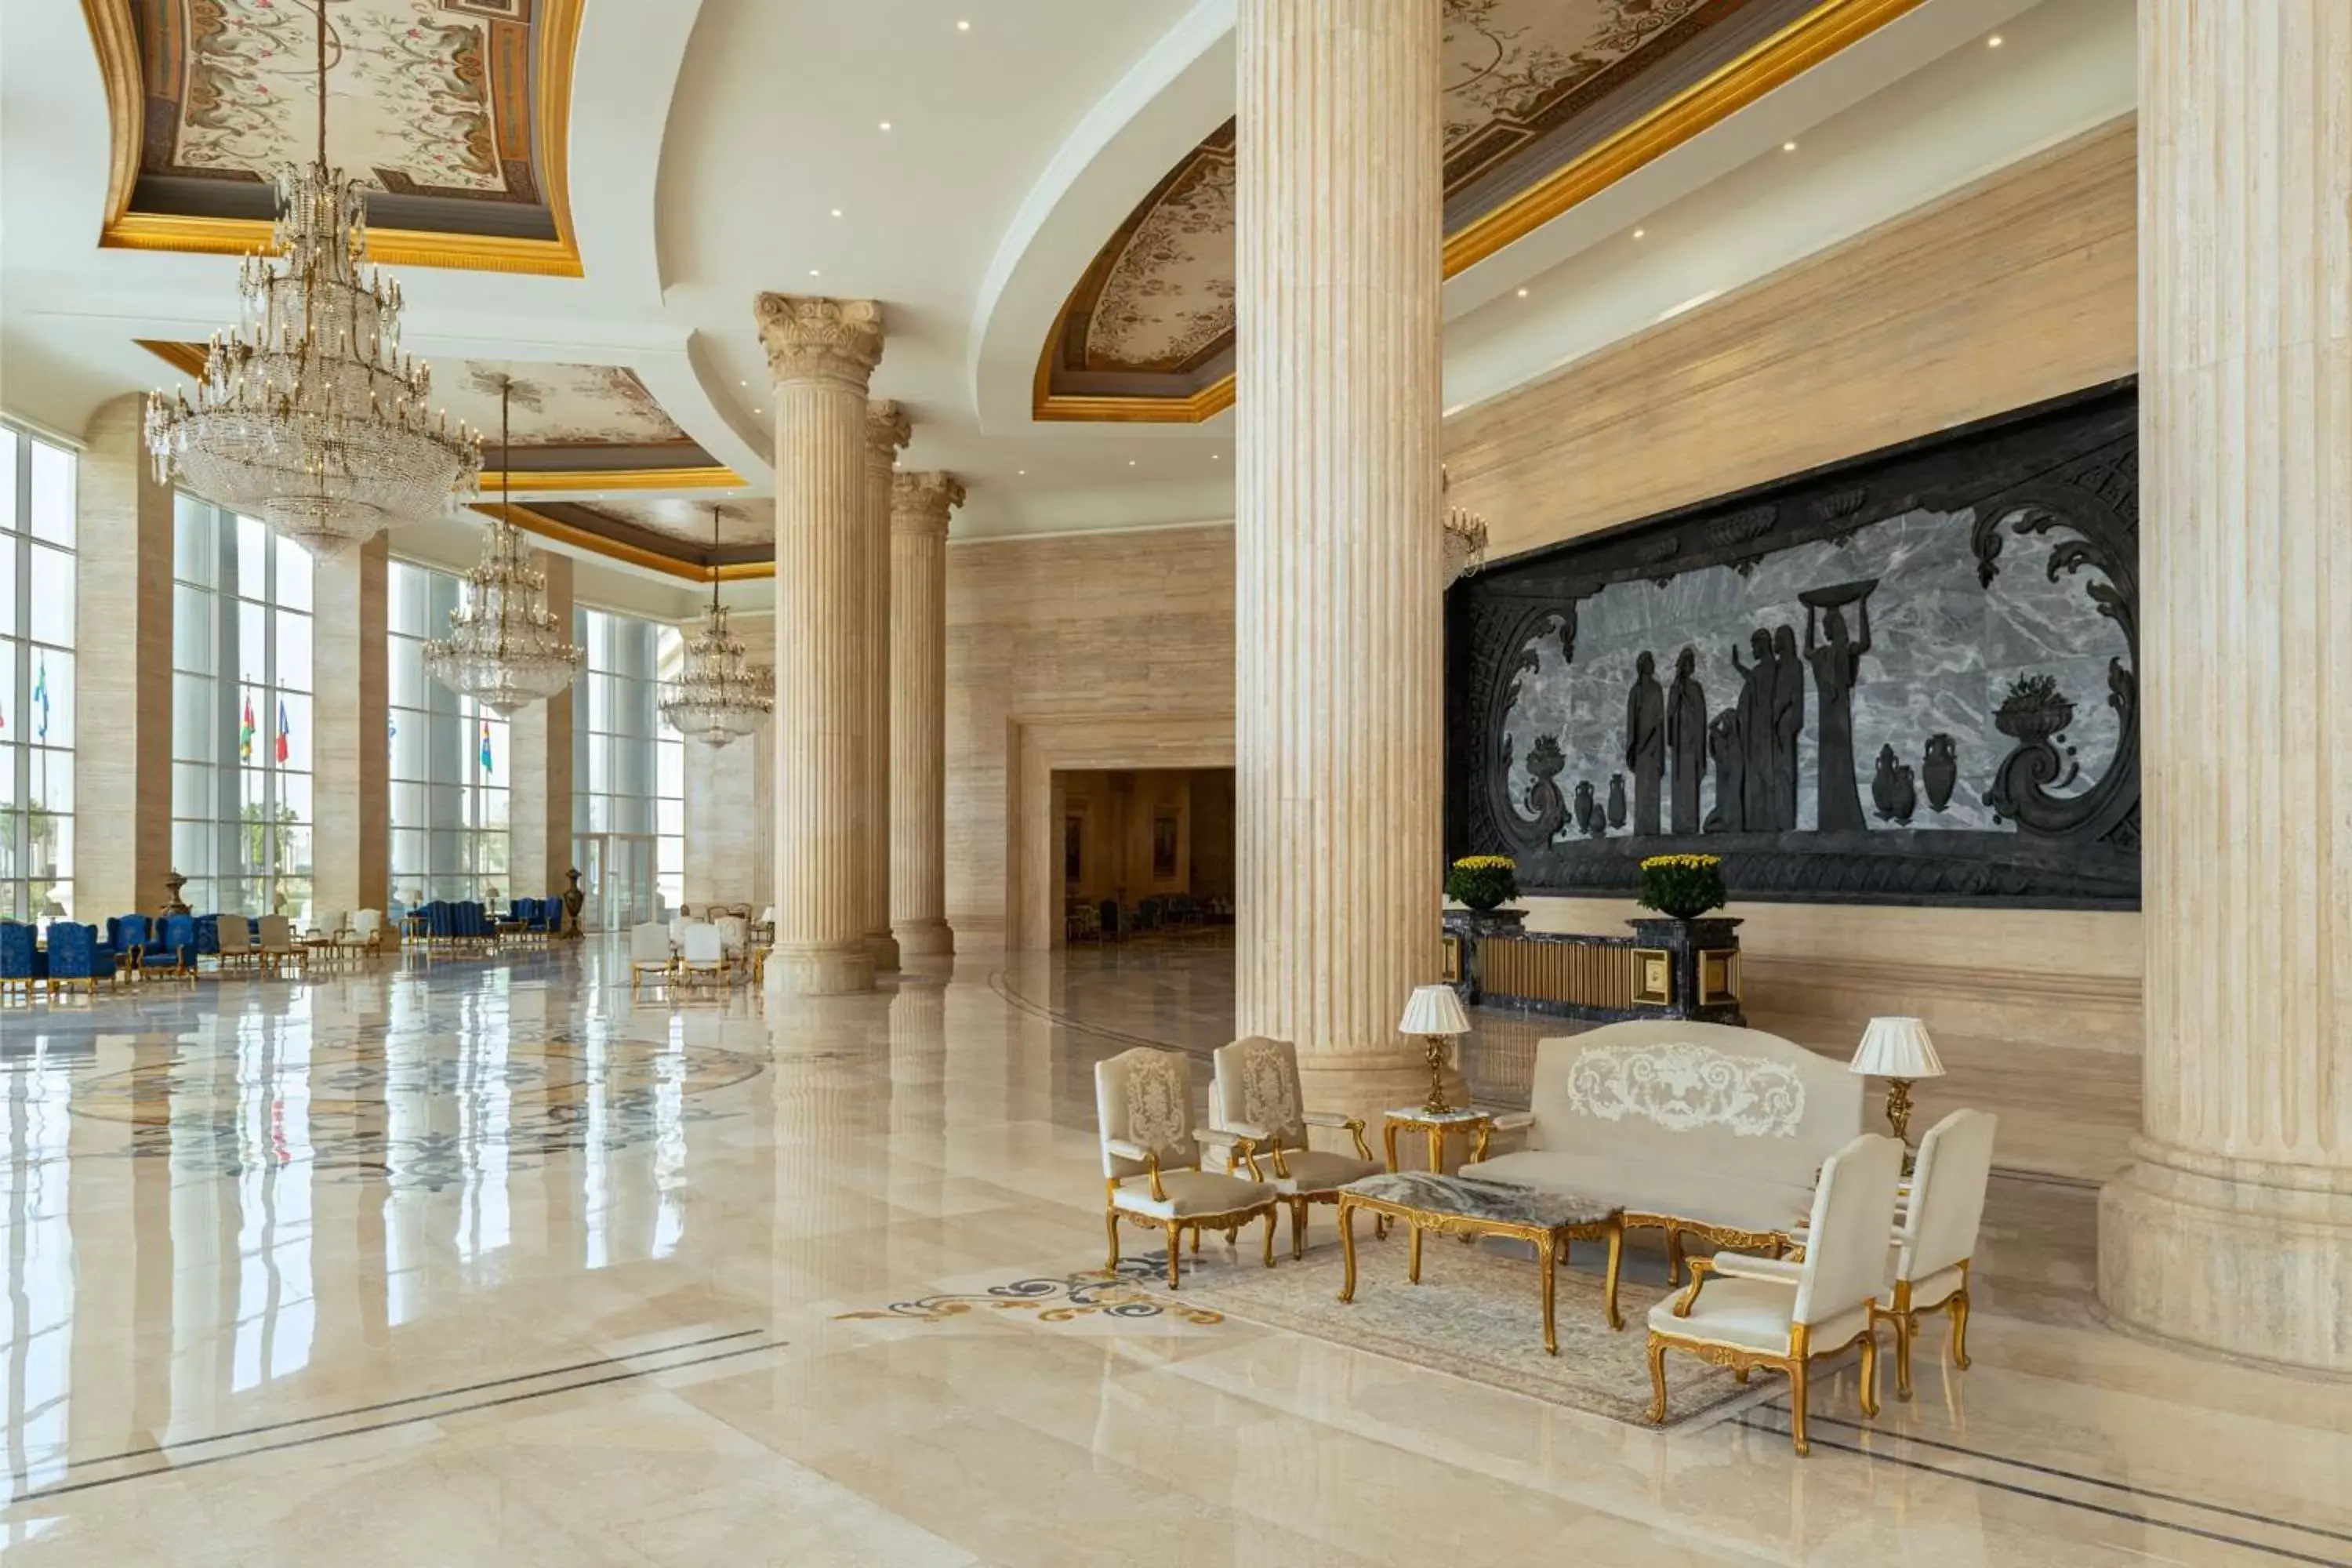 Meeting/conference room, Lobby/Reception in The St. Regis Almasa Hotel, Cairo